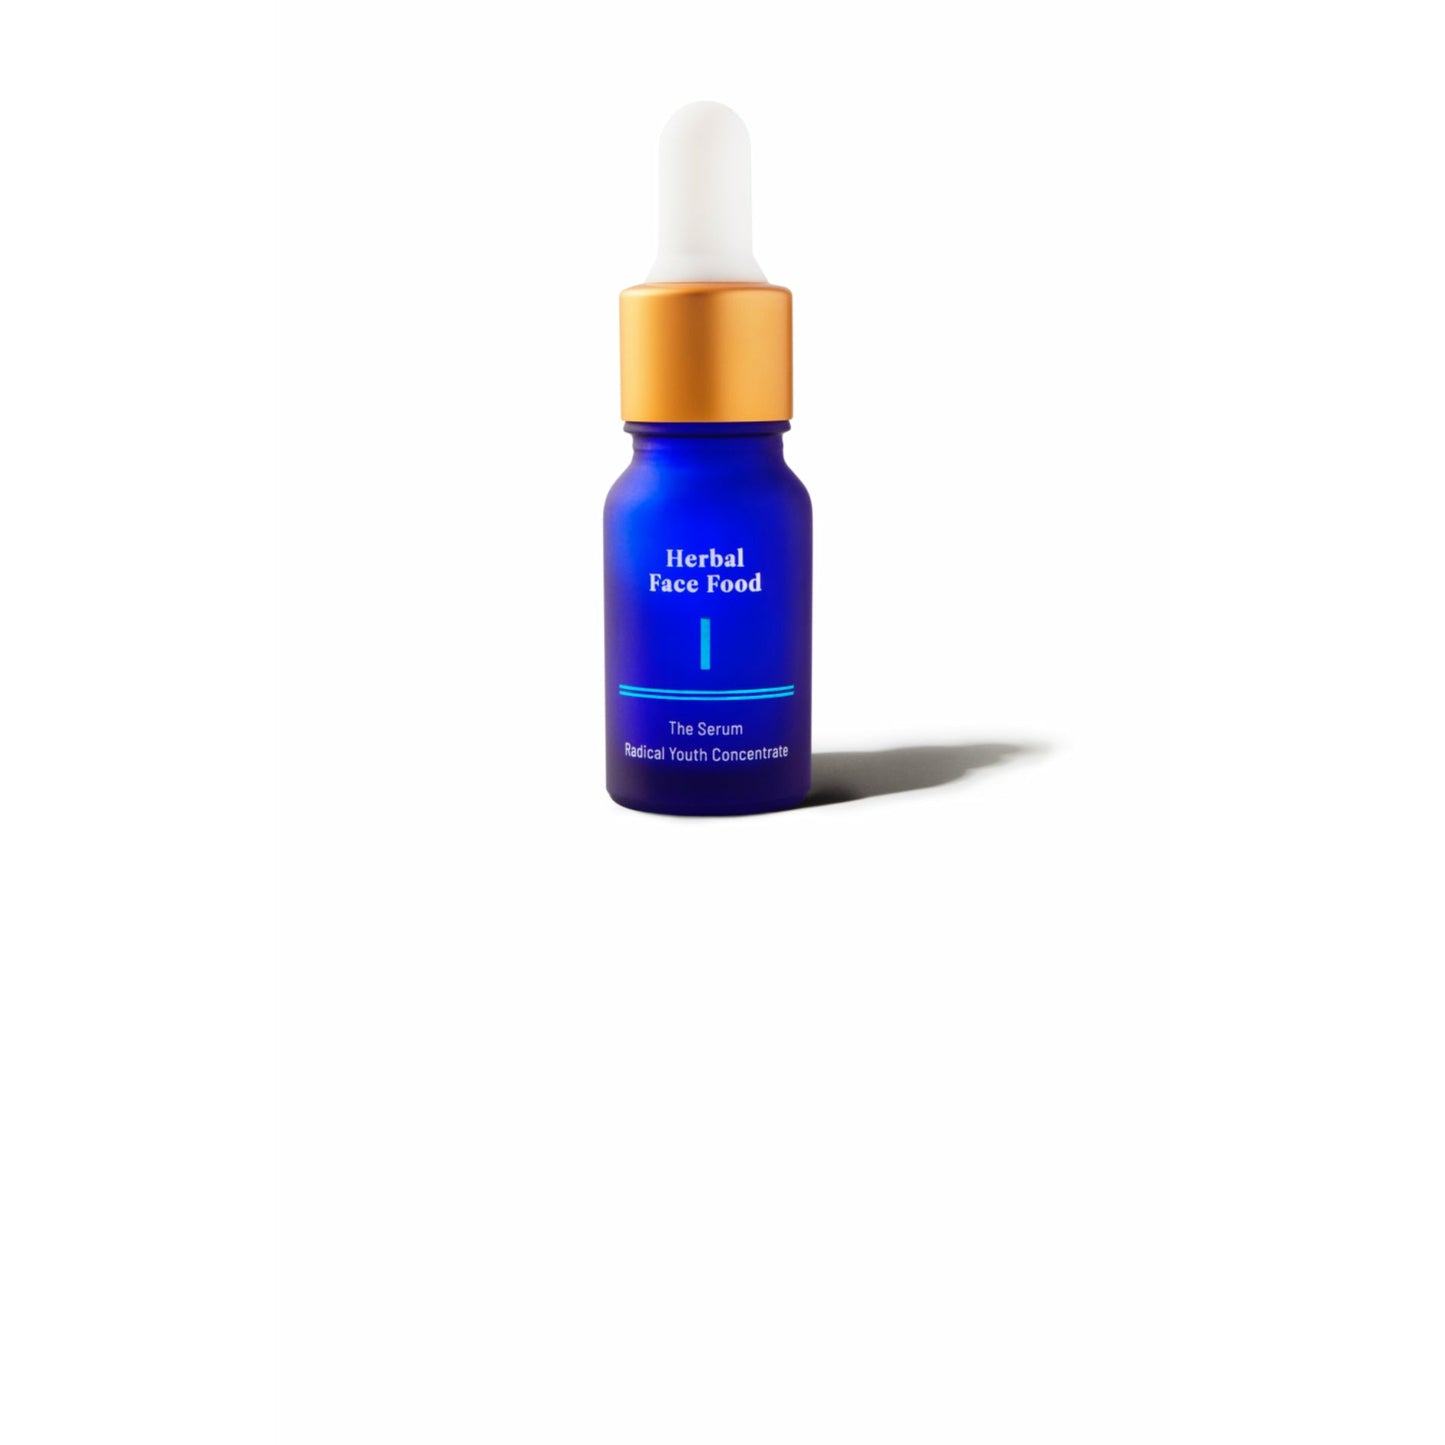 Herbal Face Food The Serum I